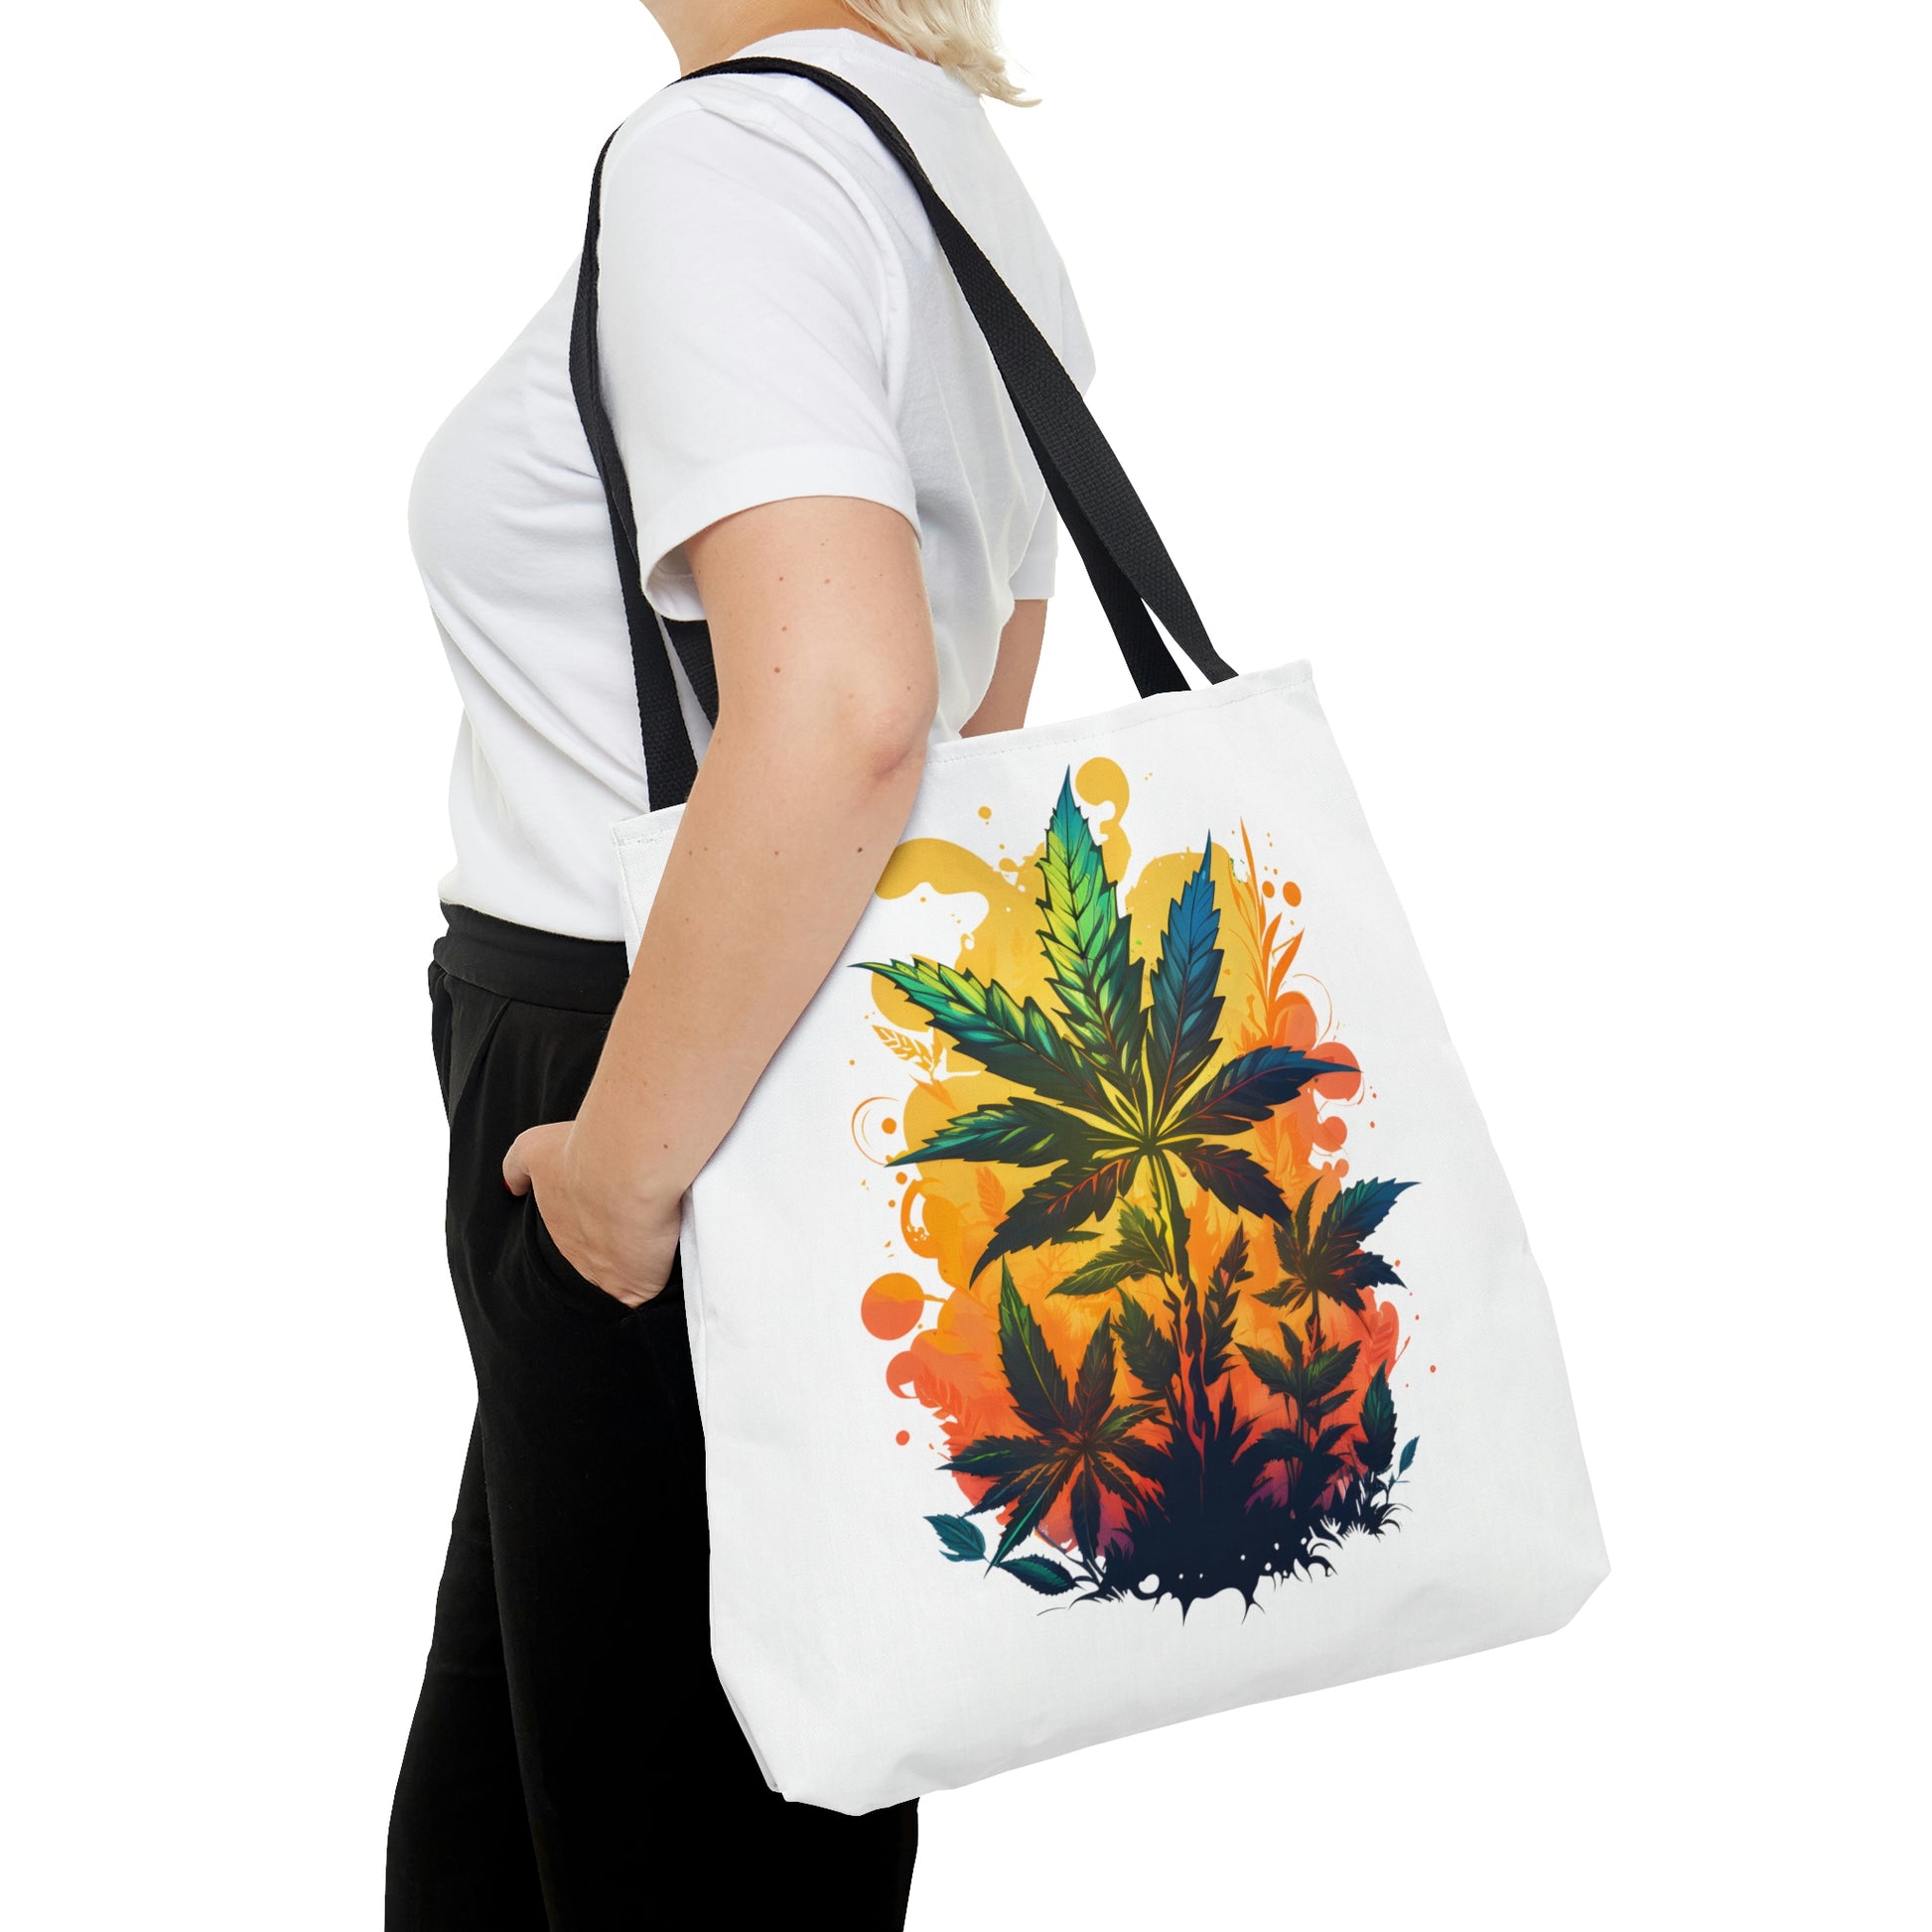 A woman is carrying the Cannabis Warm Paradise tote Bag over her left shoulder